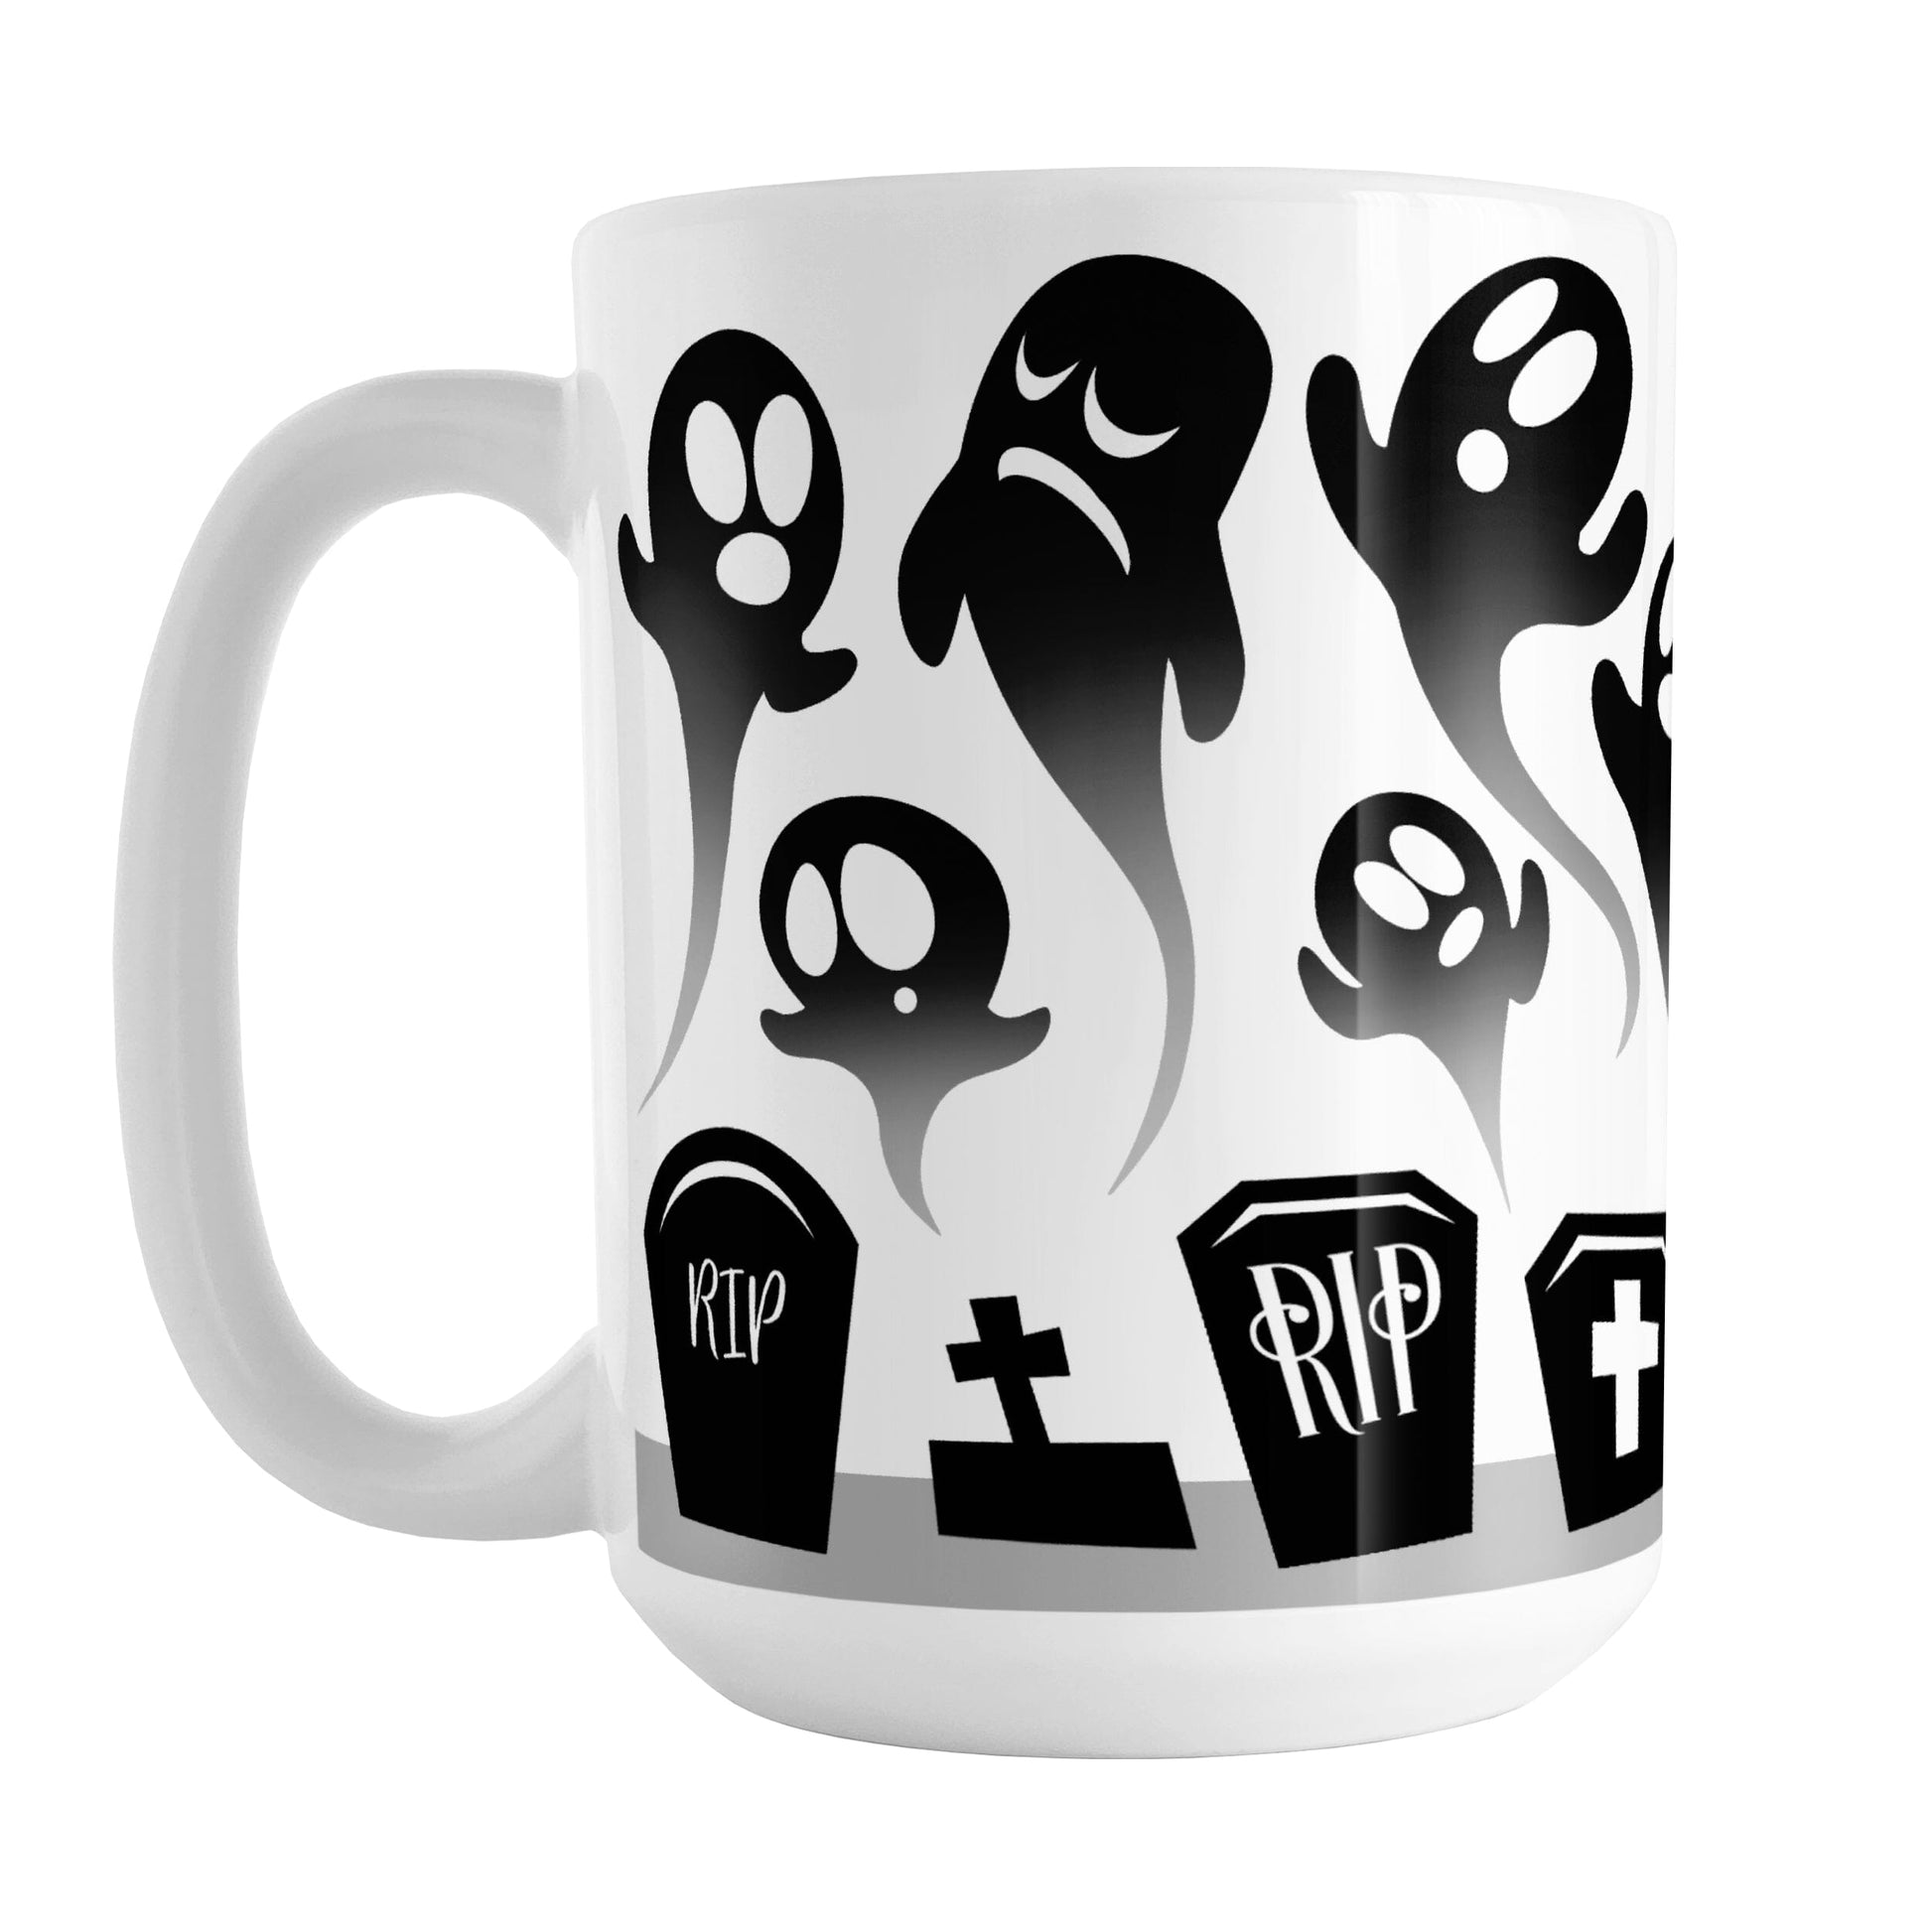 Rising Ghosts Halloween Mug (15oz) at Amy's Coffee Mugs.A ceramic coffee mug featuring whimsical ghosts rising above cemetery gravestones in a black and white design that wraps around the mug up to the handle. 